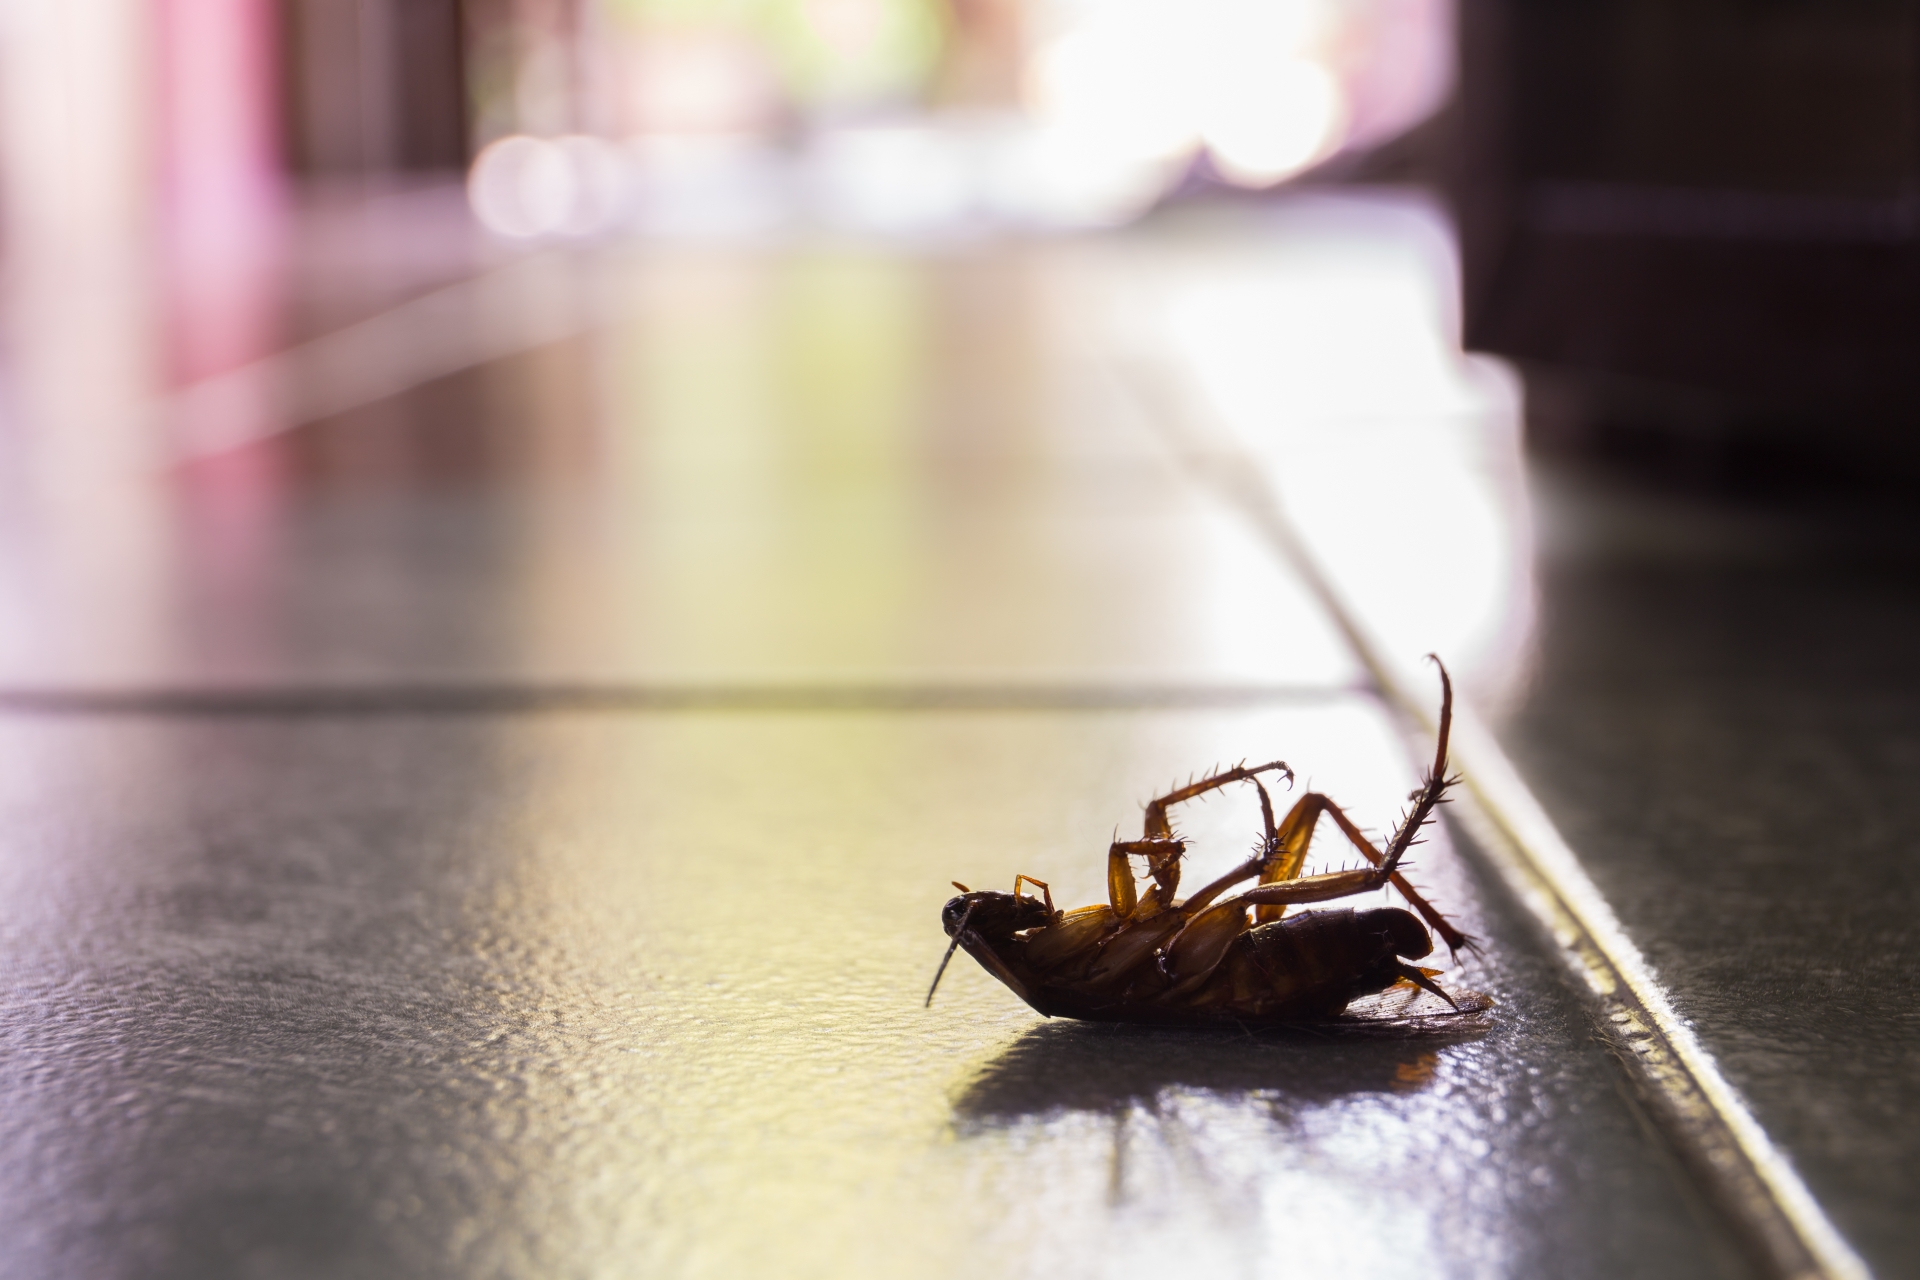 Cockroach Control, Pest Control in Holborn, Strand, Covent Garden, WC2. Call Now 020 8166 9746